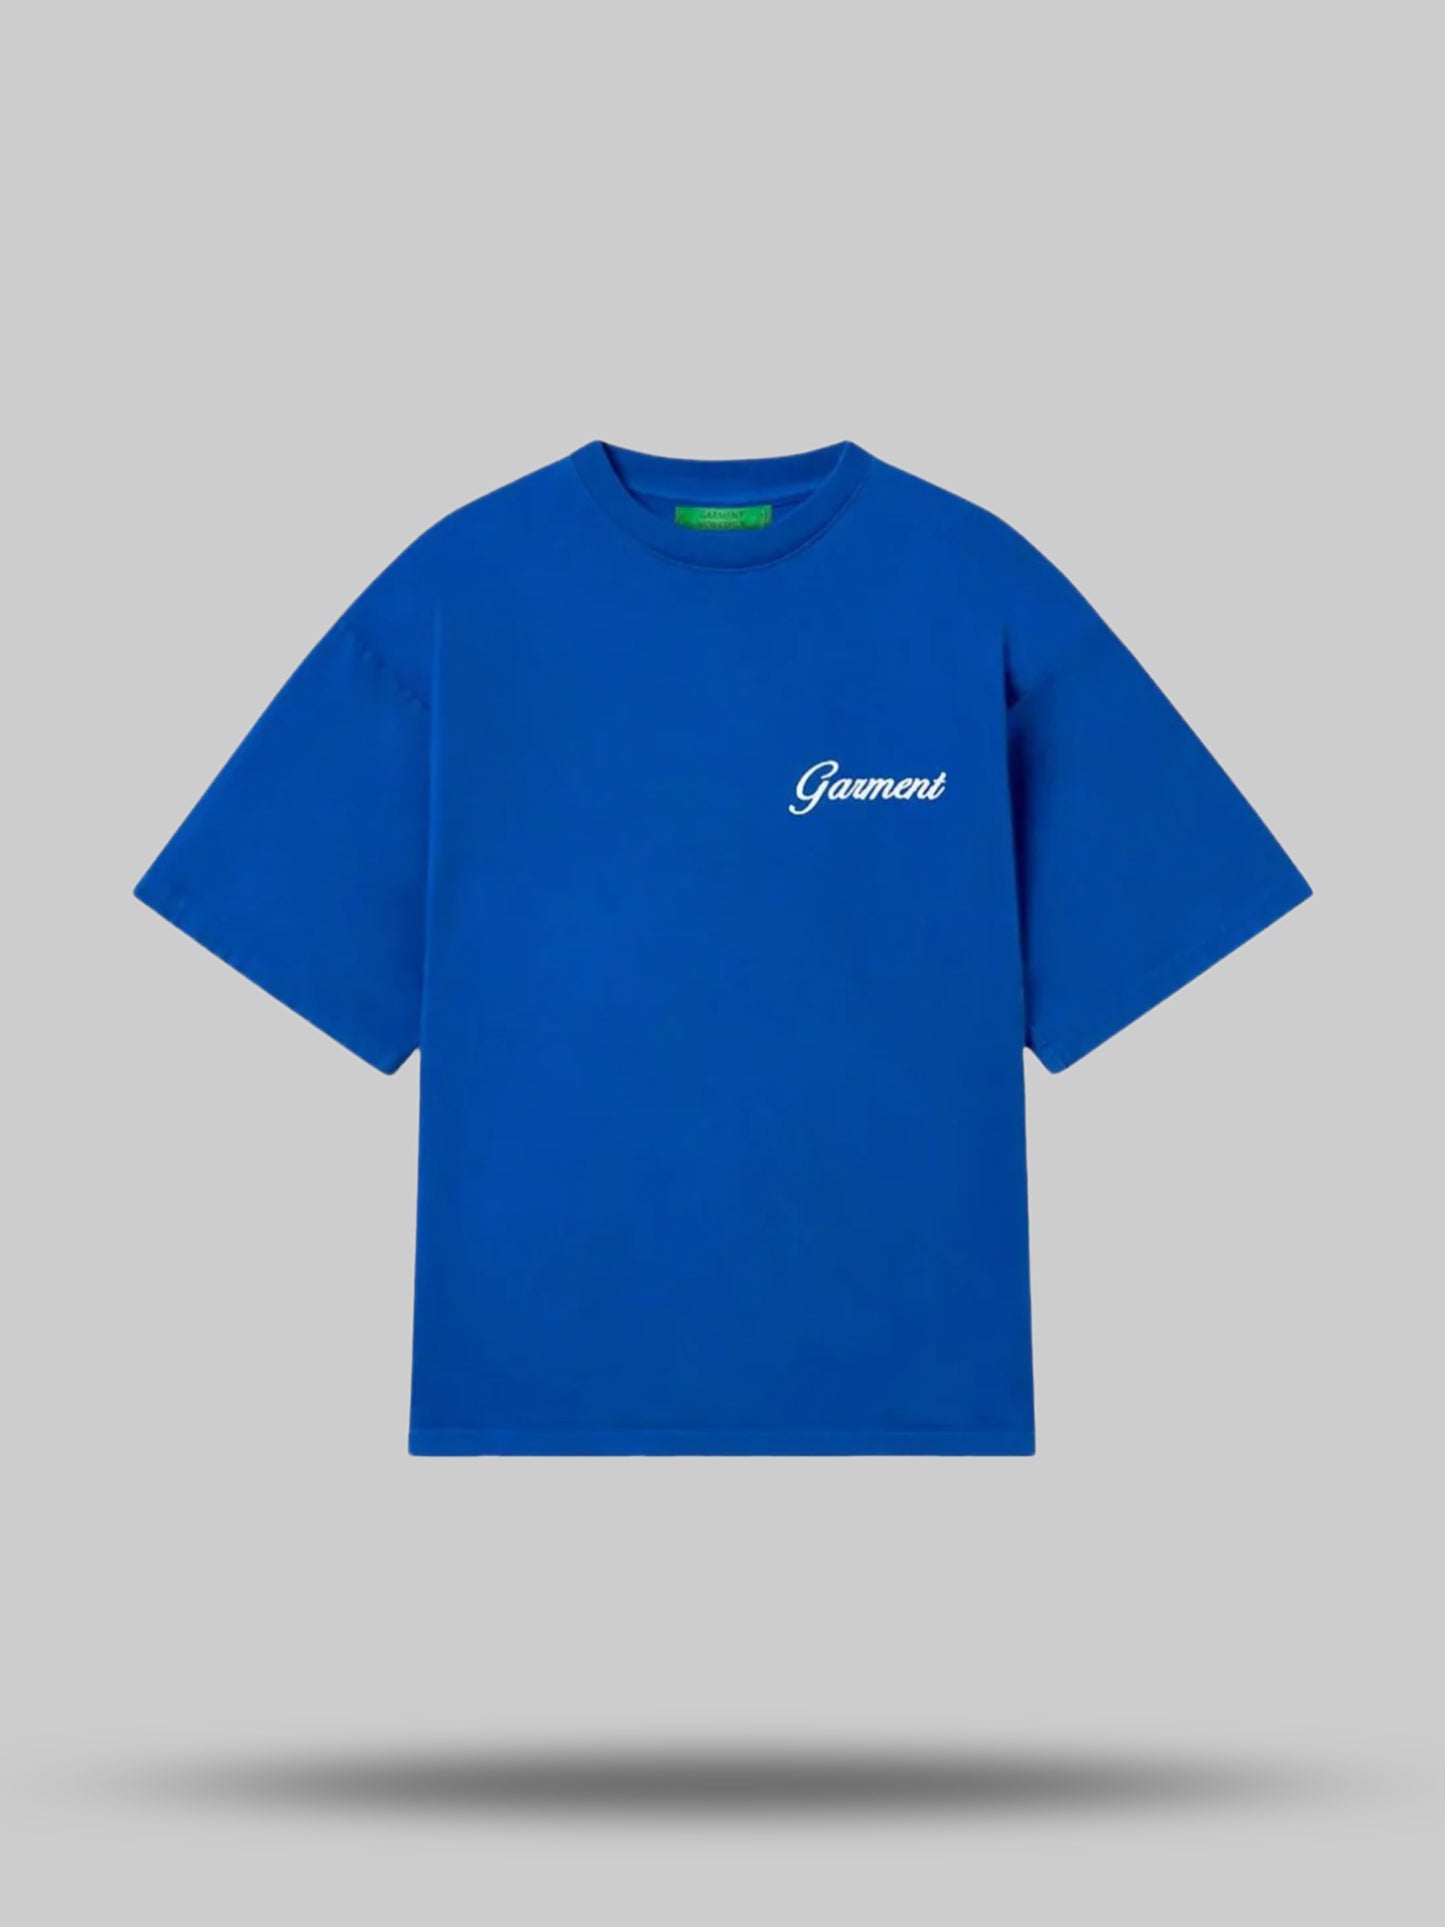 Brady blue Embroidered Boxy Tee 'If you know' Garment Workshop